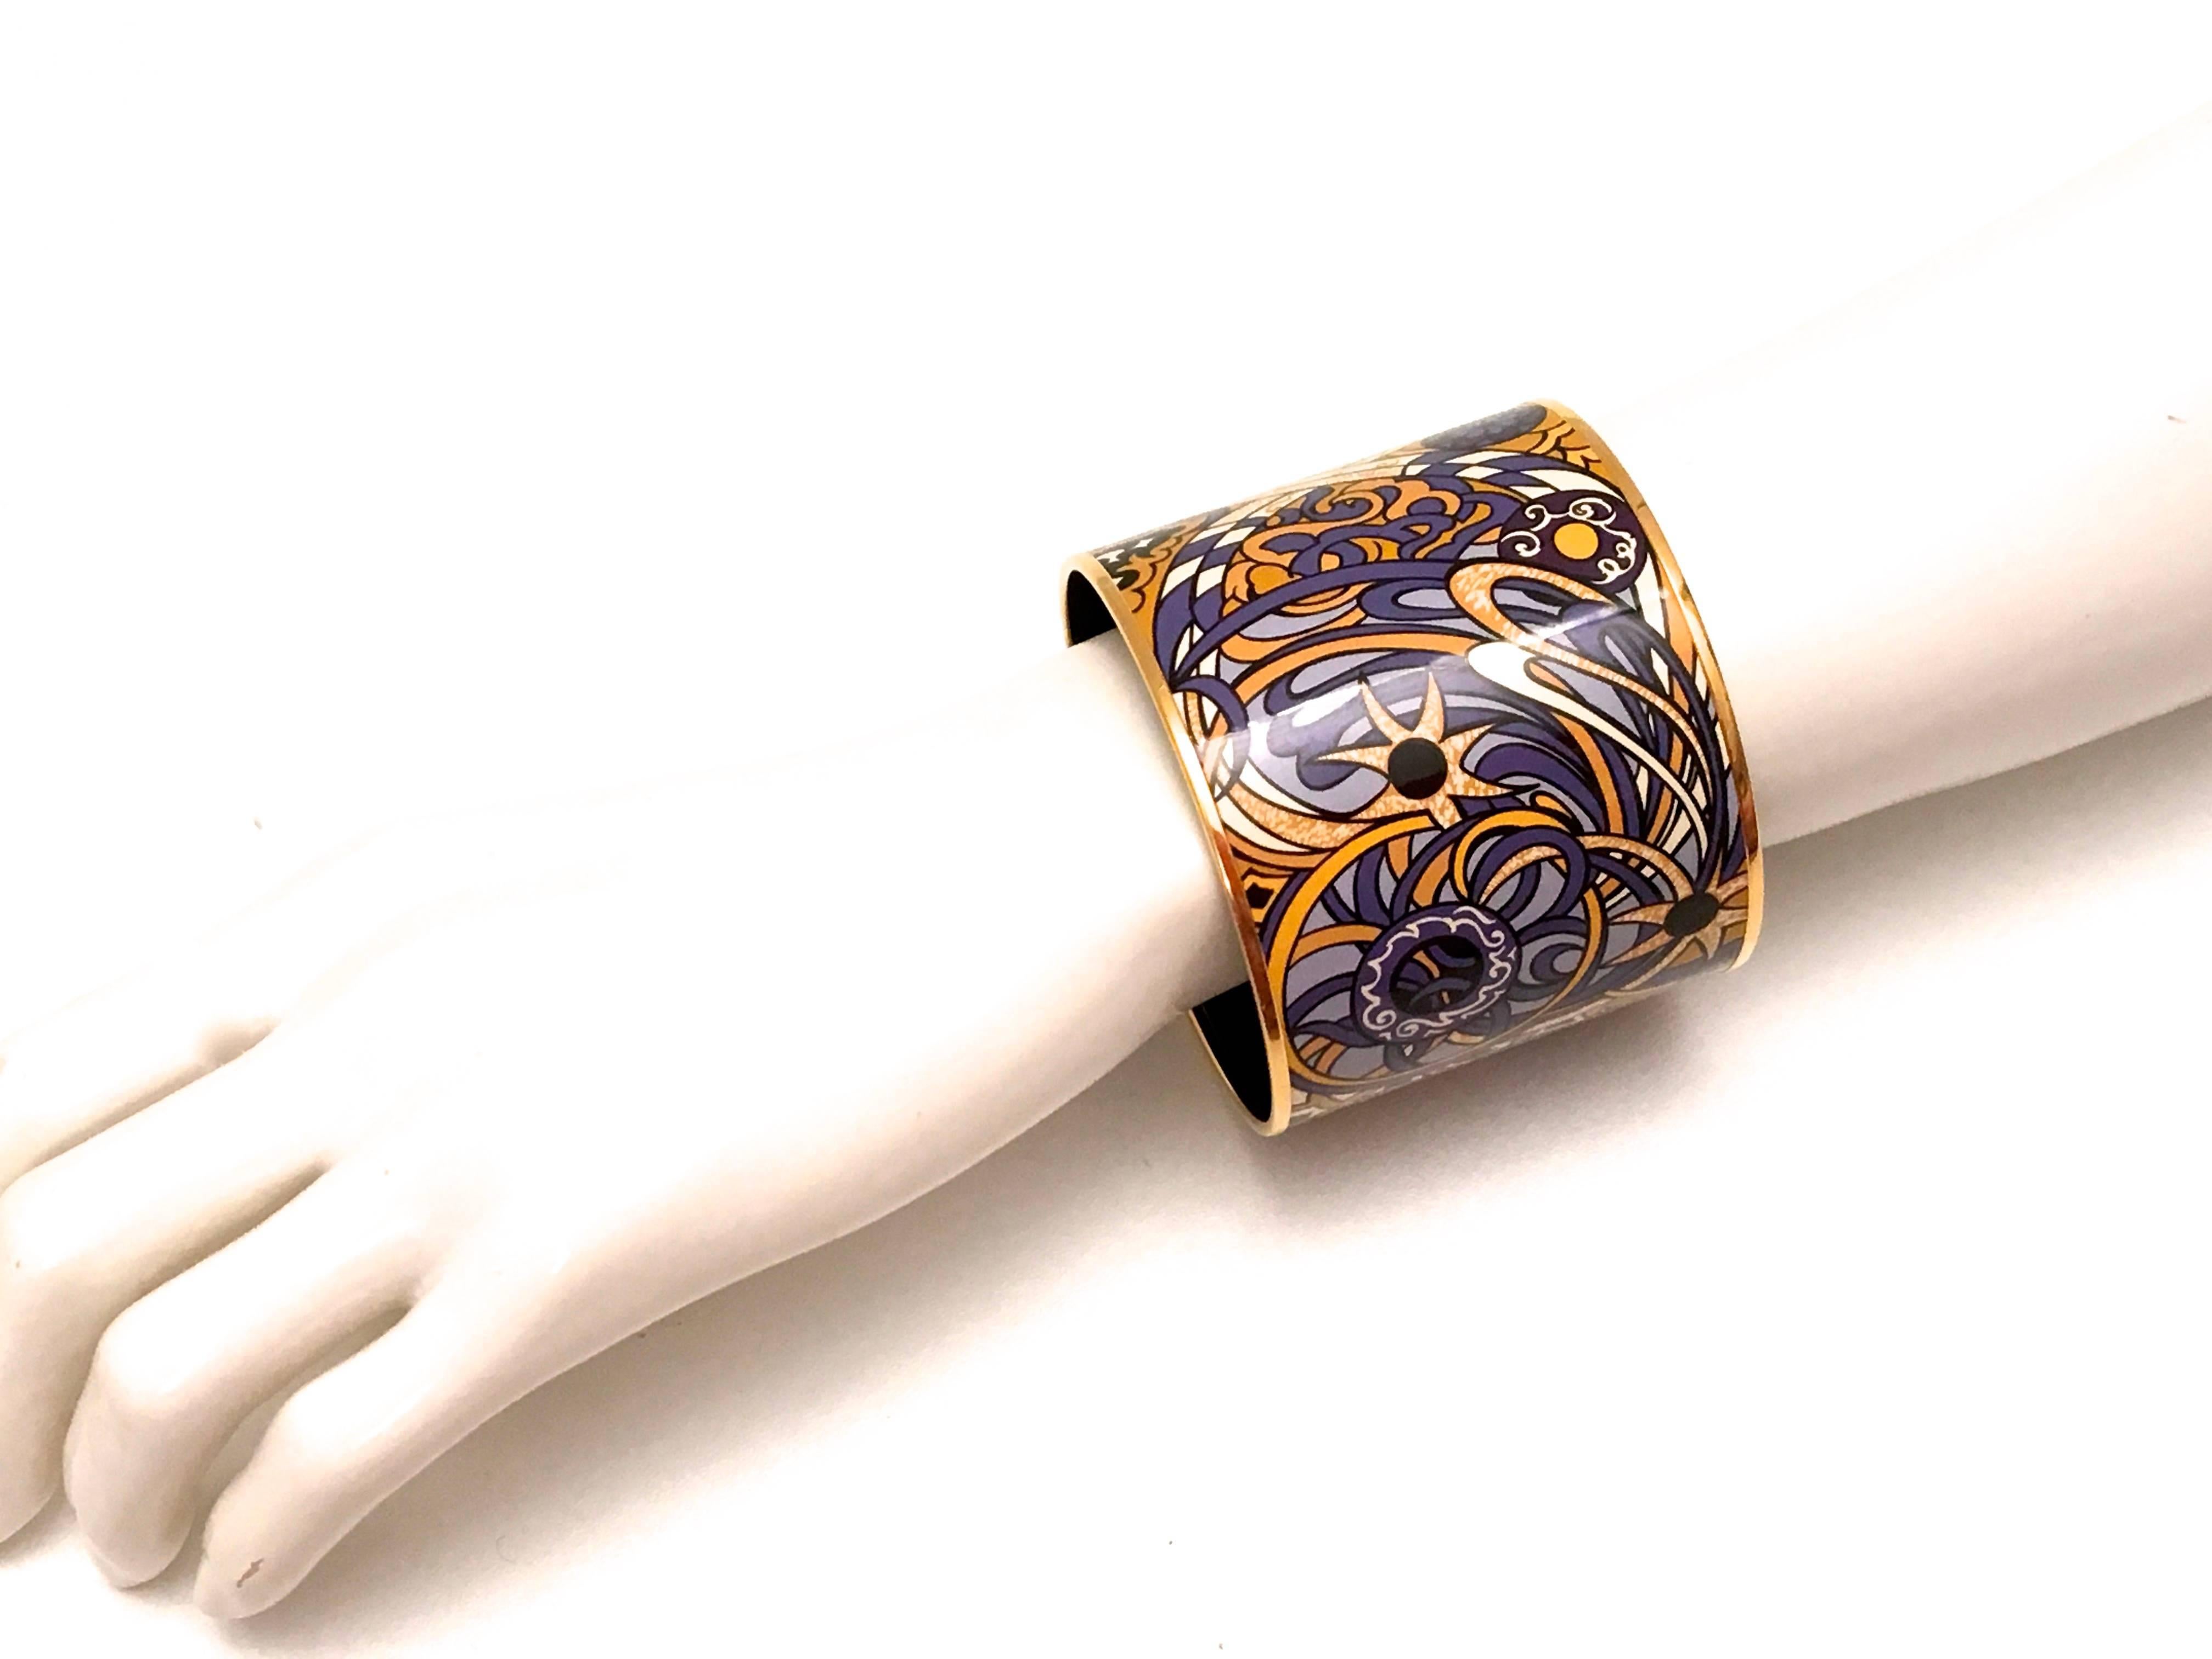 This magnificent new Hermes enamel mega bracelet is a real treasure. The bracelet measures 2.5 inches wide and has a diameter of 2.75 inches which is Hermes' GM size. It is a beautiful design which encompasses a pattern of varying shades of purple